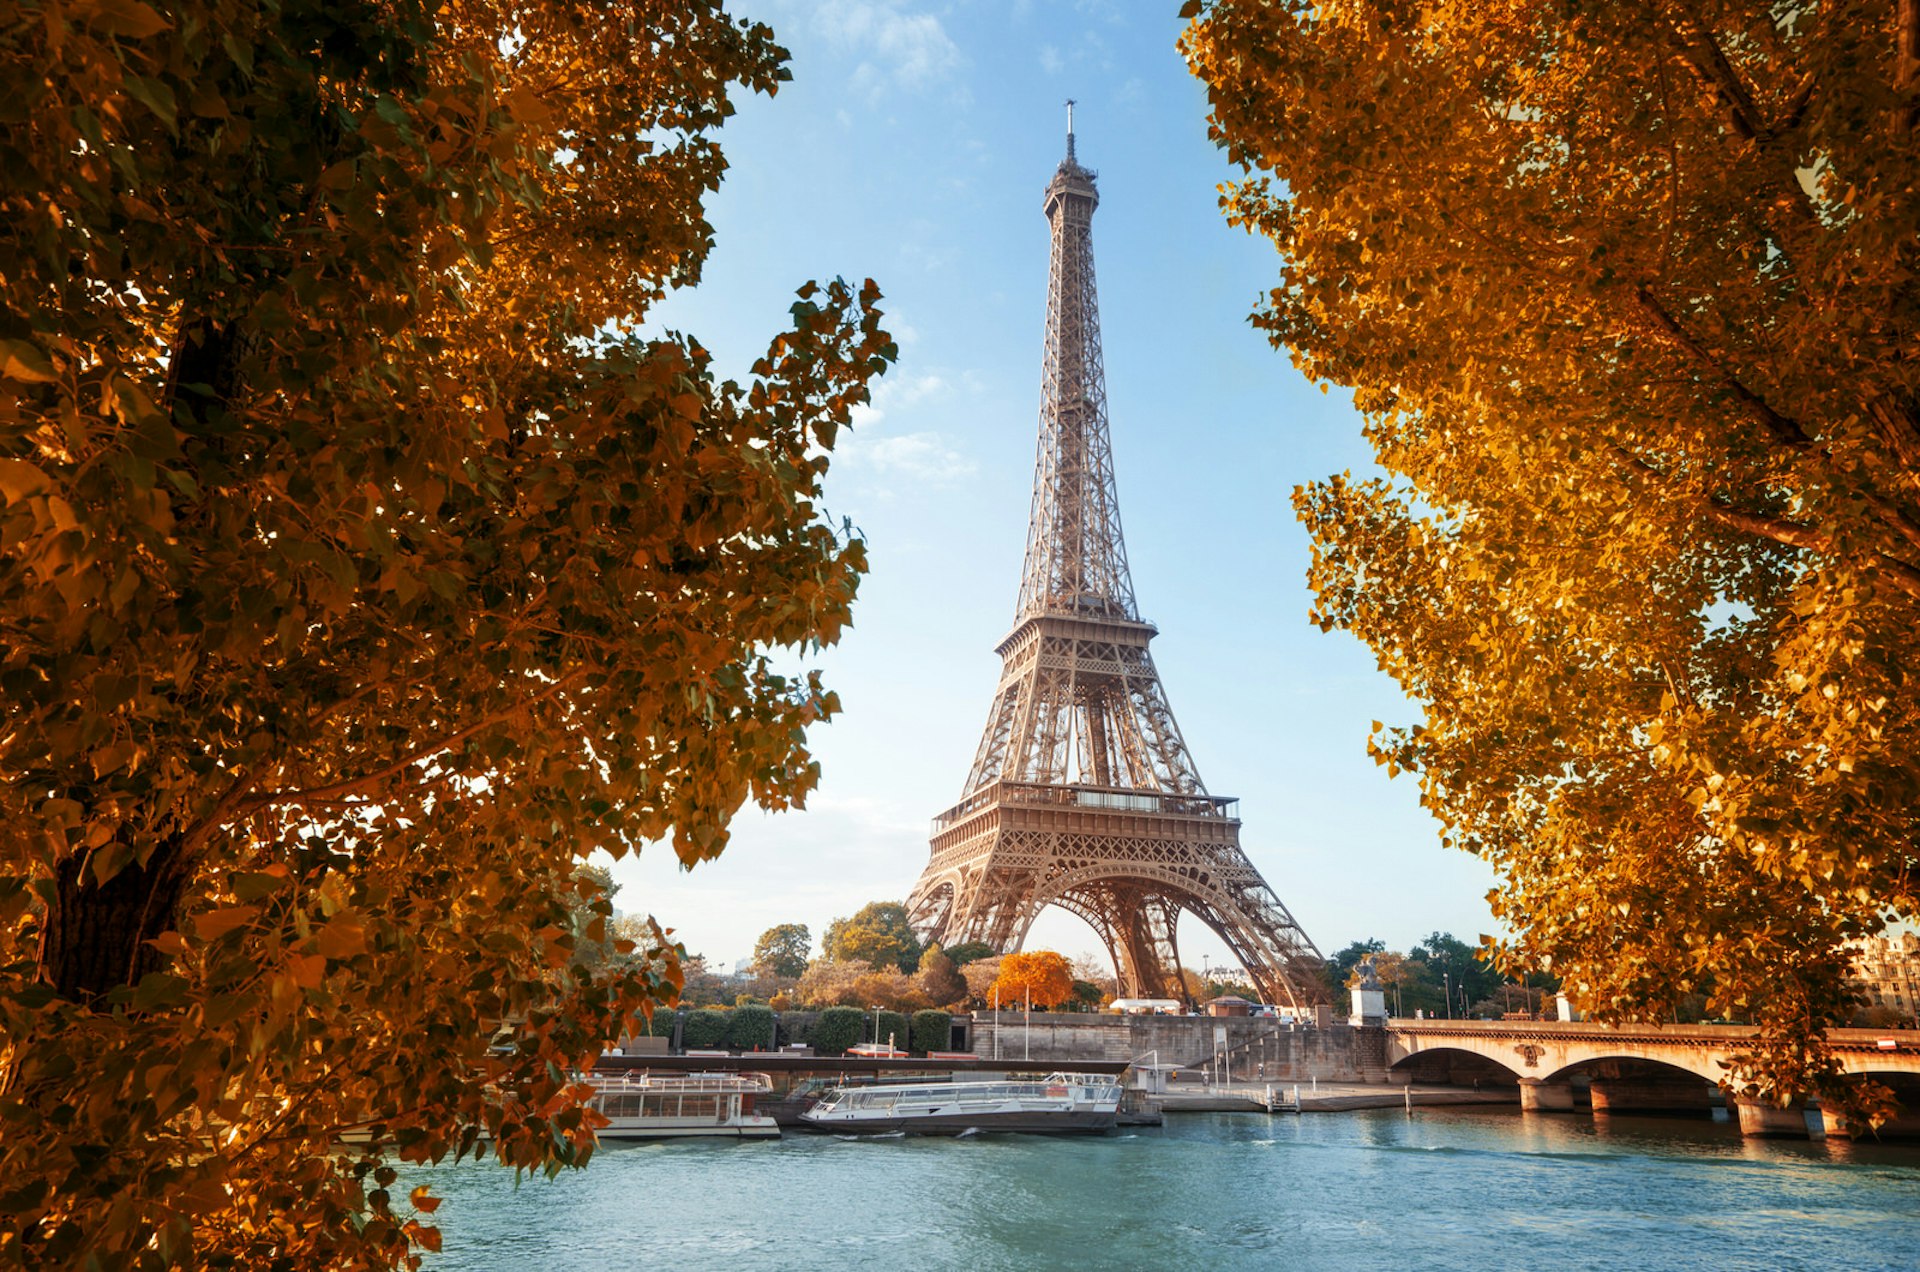 The Eiffel Tower as viewed from across the Seine and framed neatly by two leafy trees in autumn colours